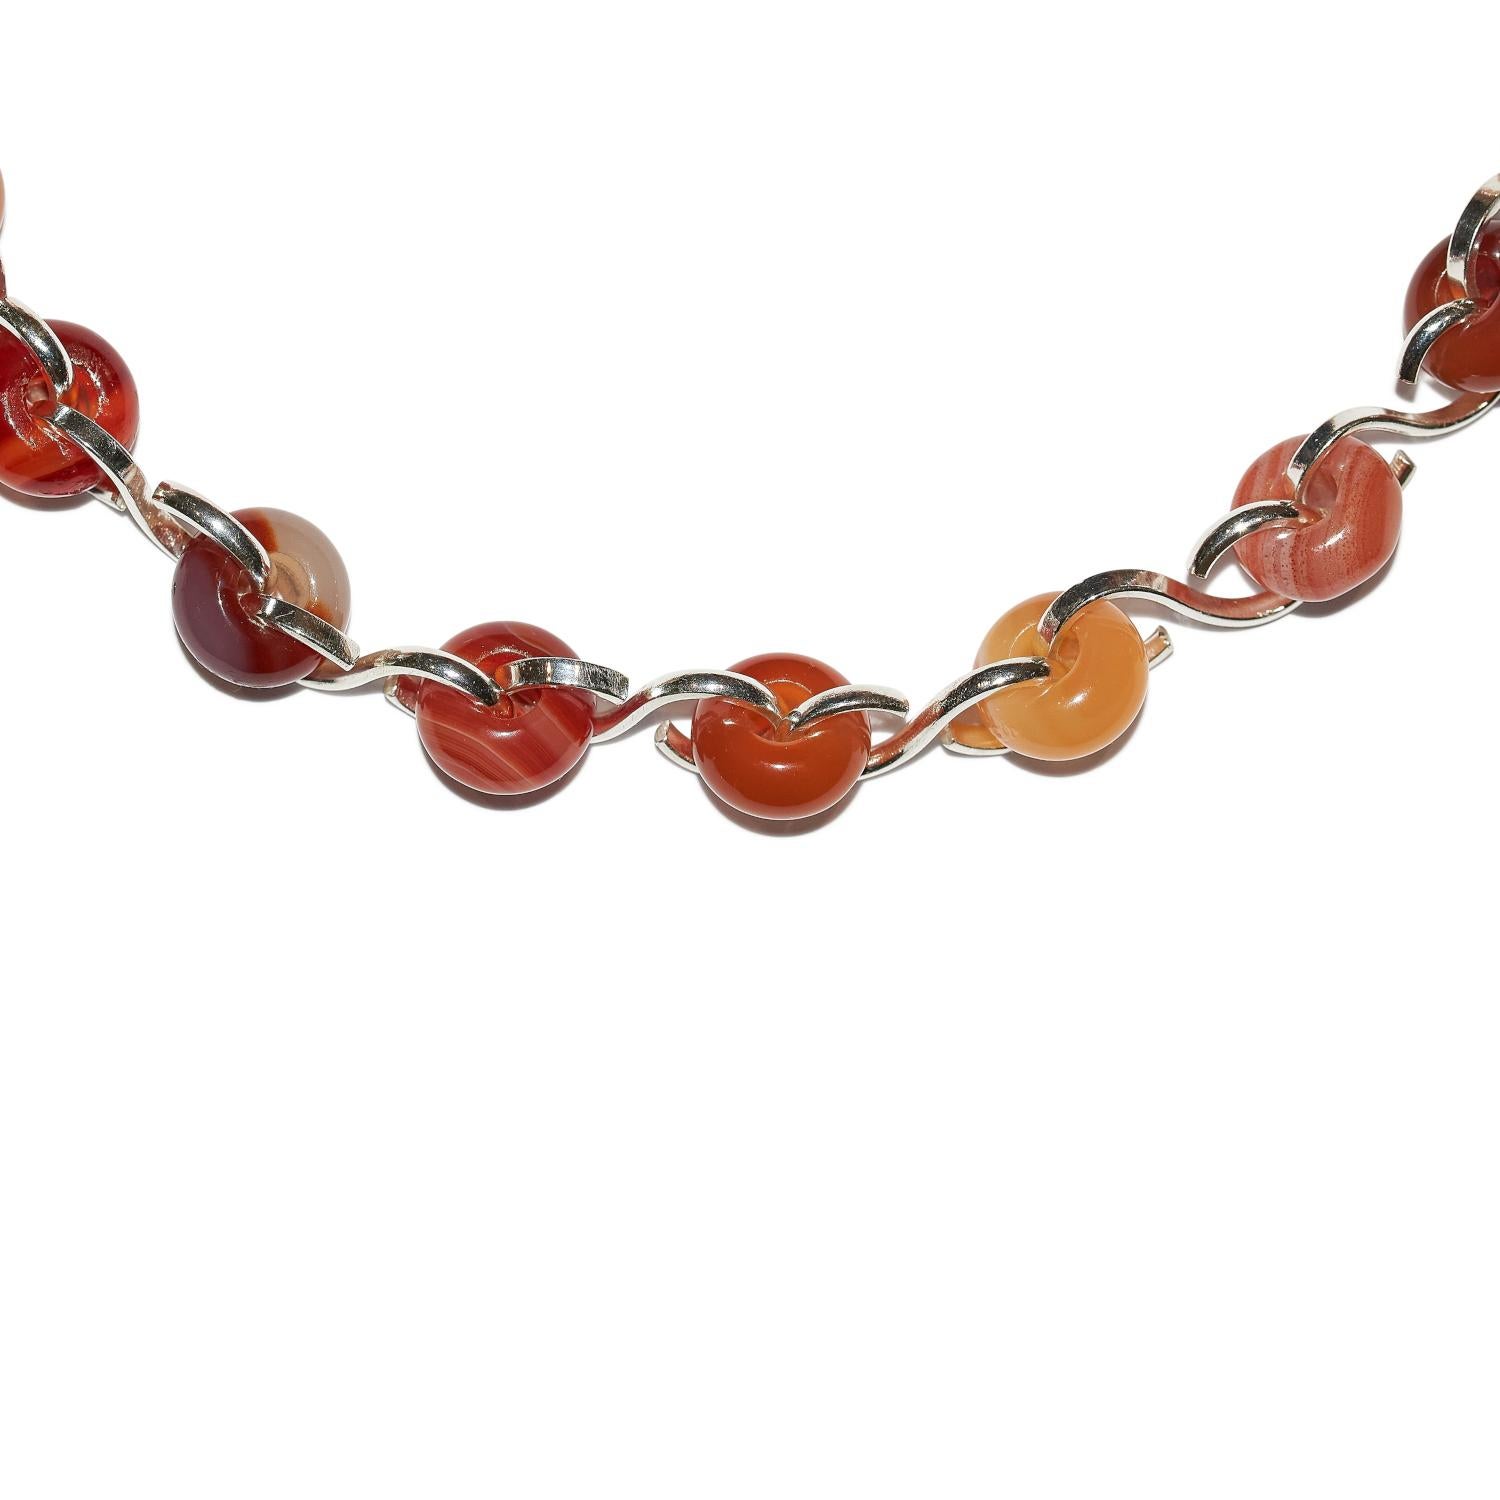 The Ornate Poise Collar necklace in sterling silver with chunky agate rondelle beads is carefully handcrafted in our North London studio. Each sterling silver link is handmade to hold the agate beads in place whilst creating a continuous loop around